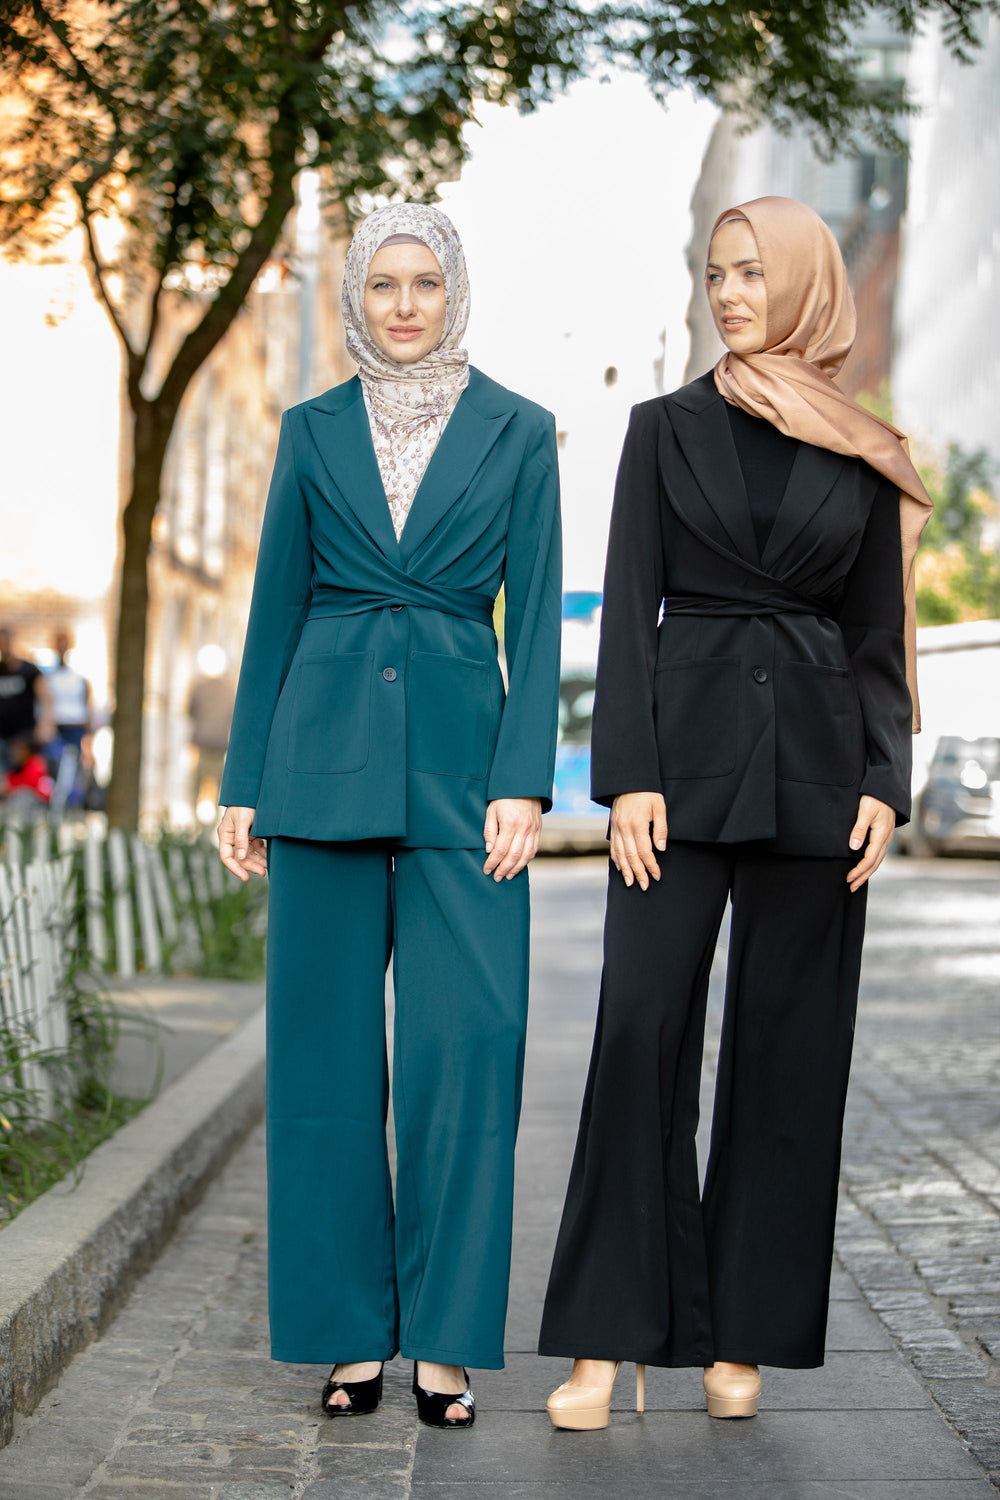 Urban Modesty - Teal Jacket and Pants Suit